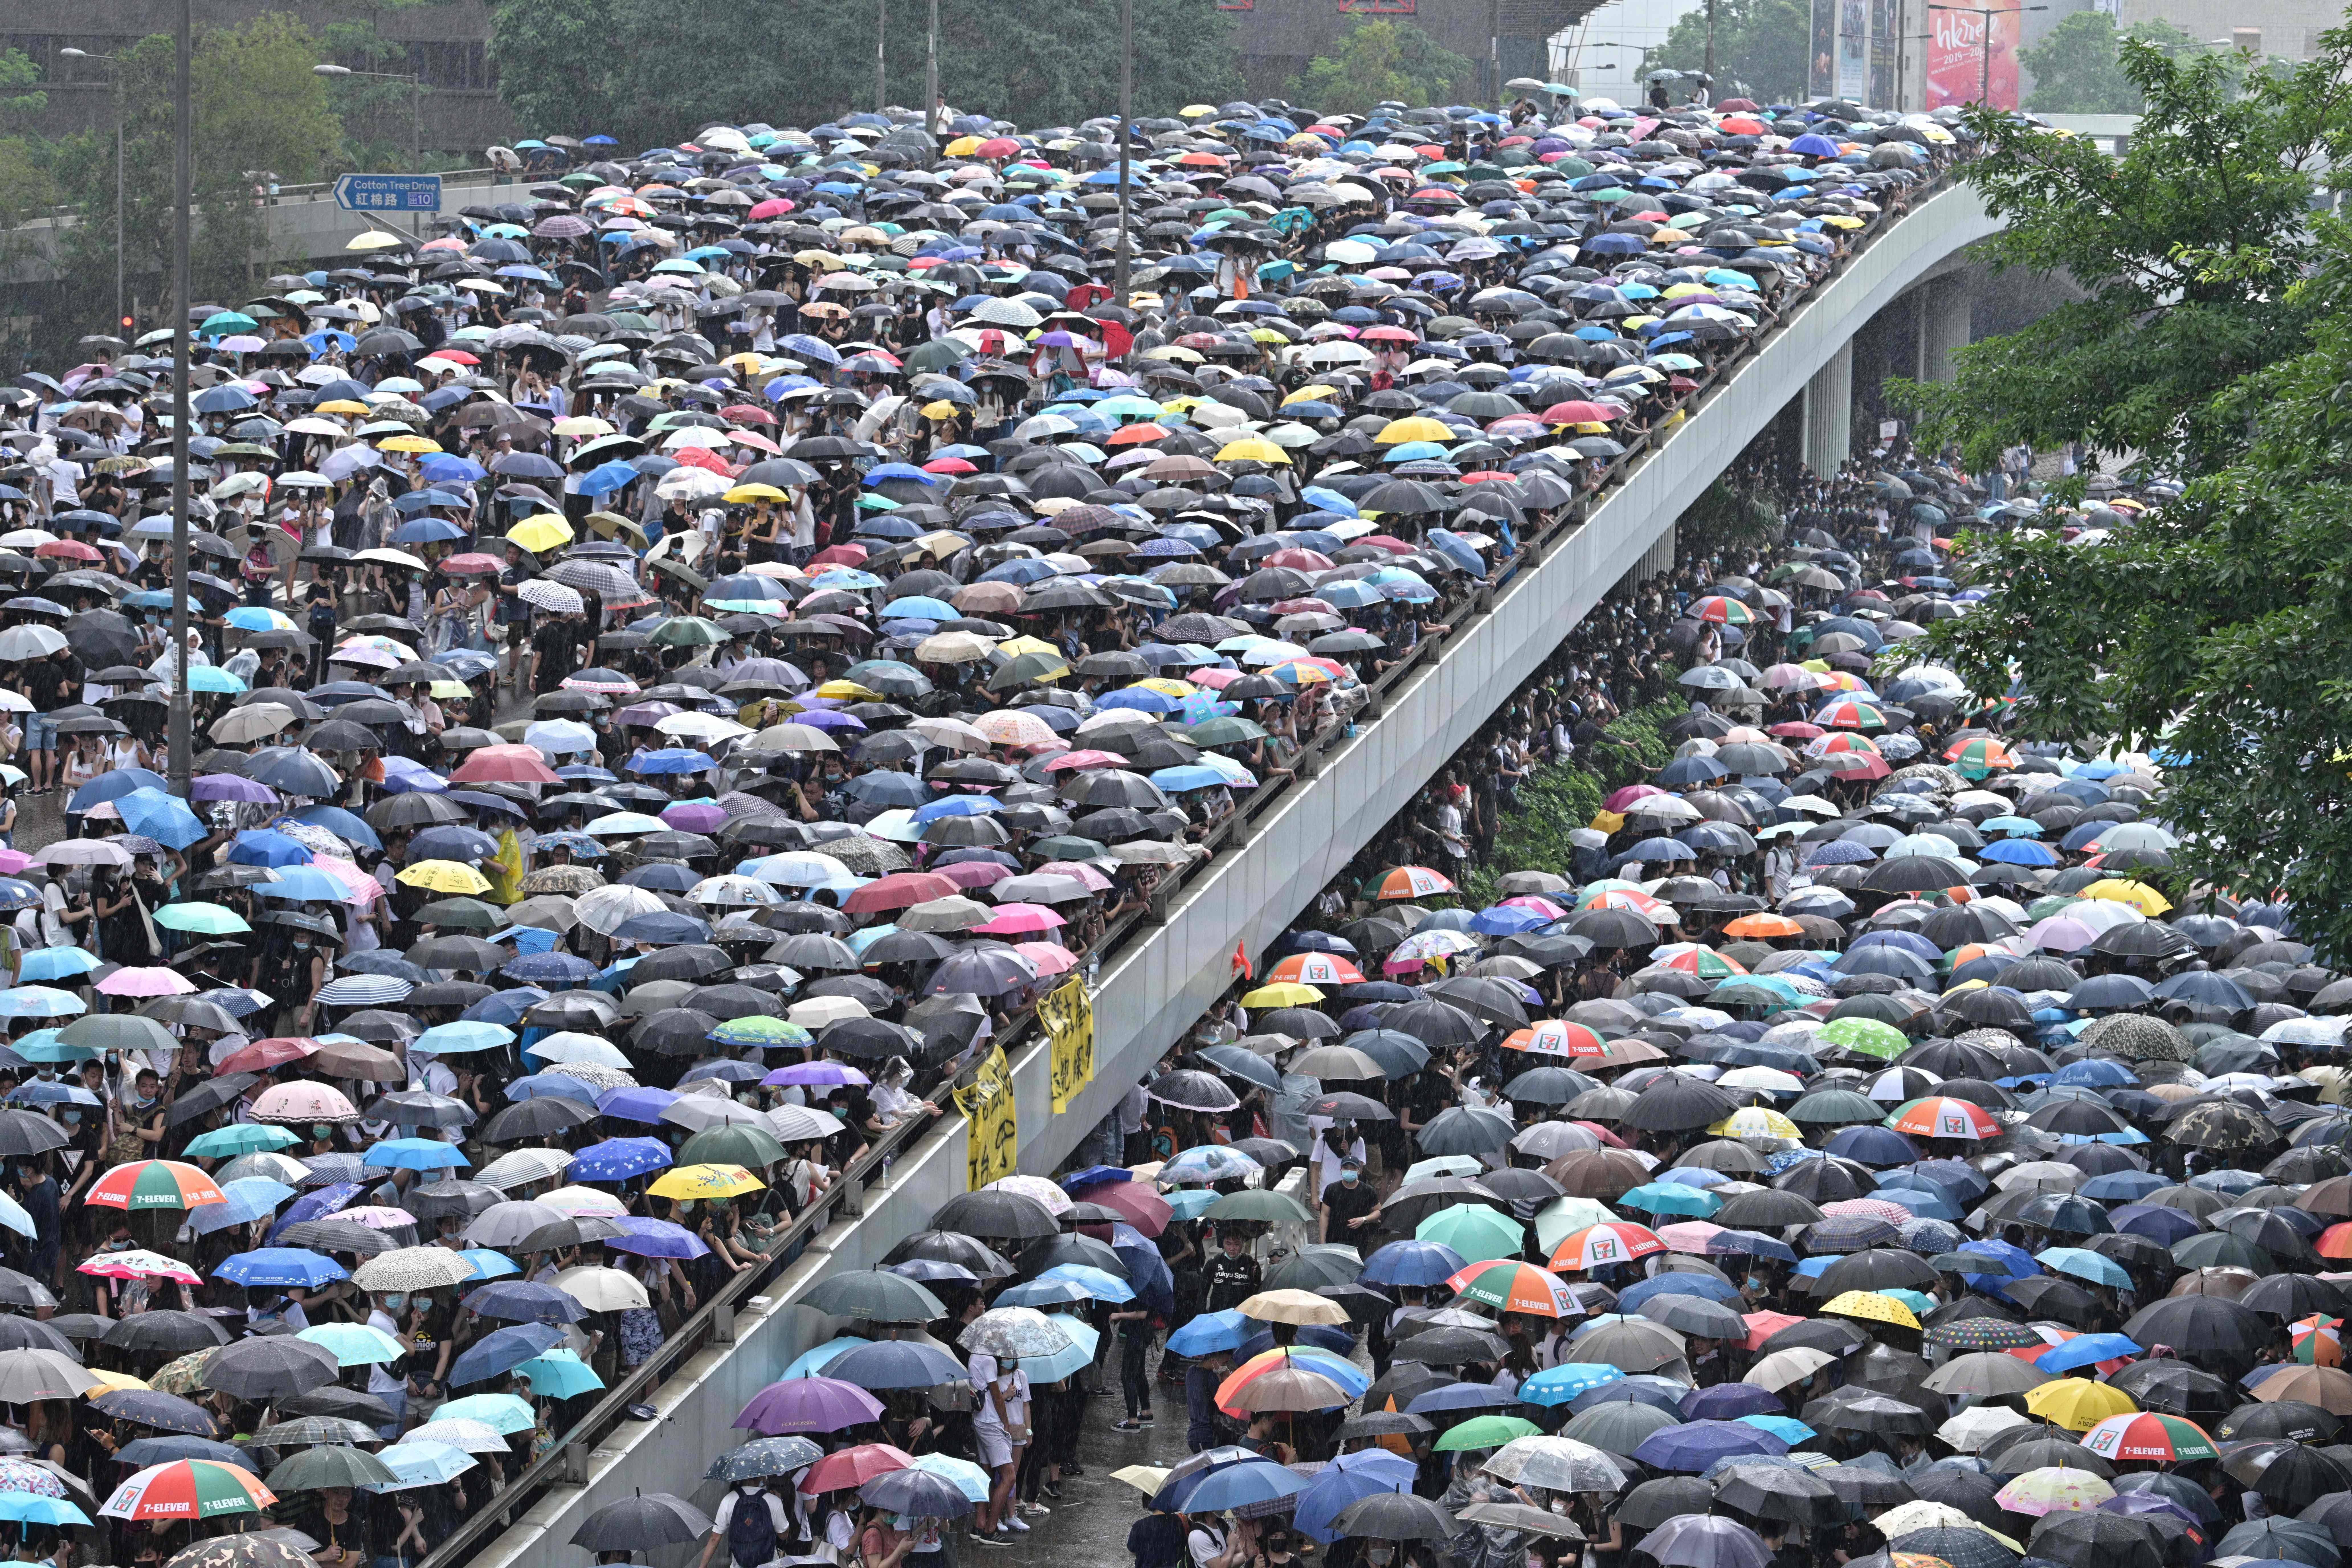 Protesters shelter under umbrellas during a downpour as they occupy roads near the government headquarters in Hong Kong on June 12, 2019. - Tens of thousands of protesters paralysed central Hong Kong.